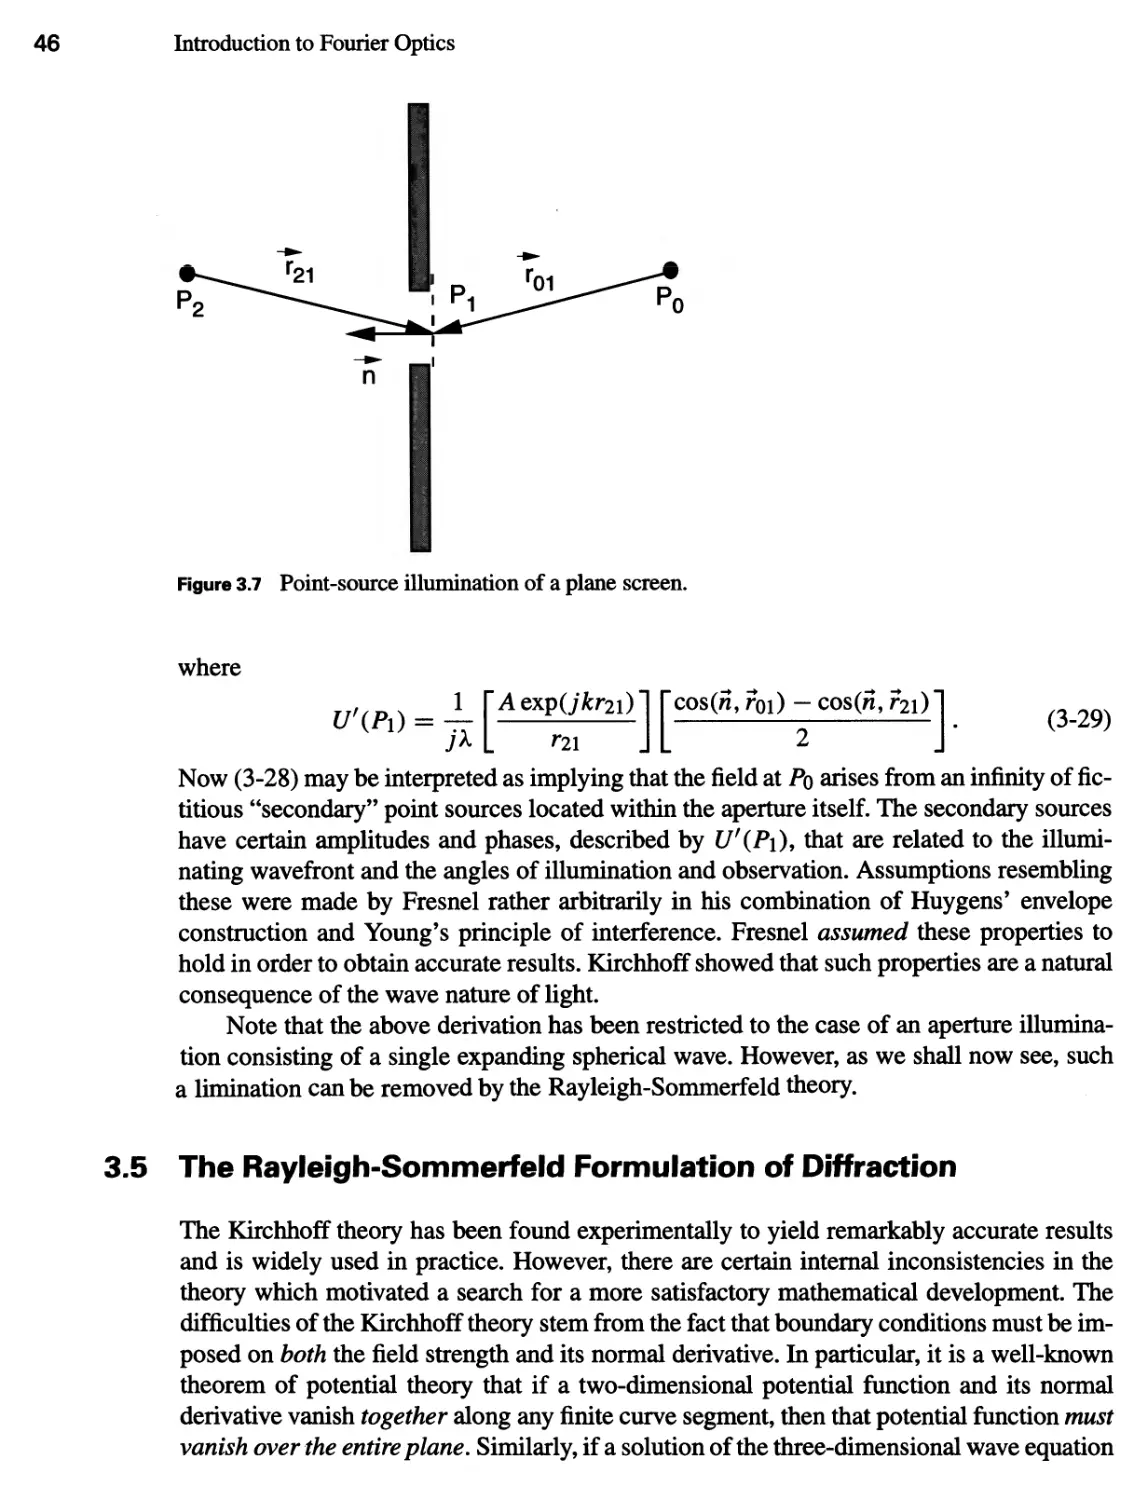 3.5 The Rayleigh-Sommerfeld Formulation of Diffraction 46